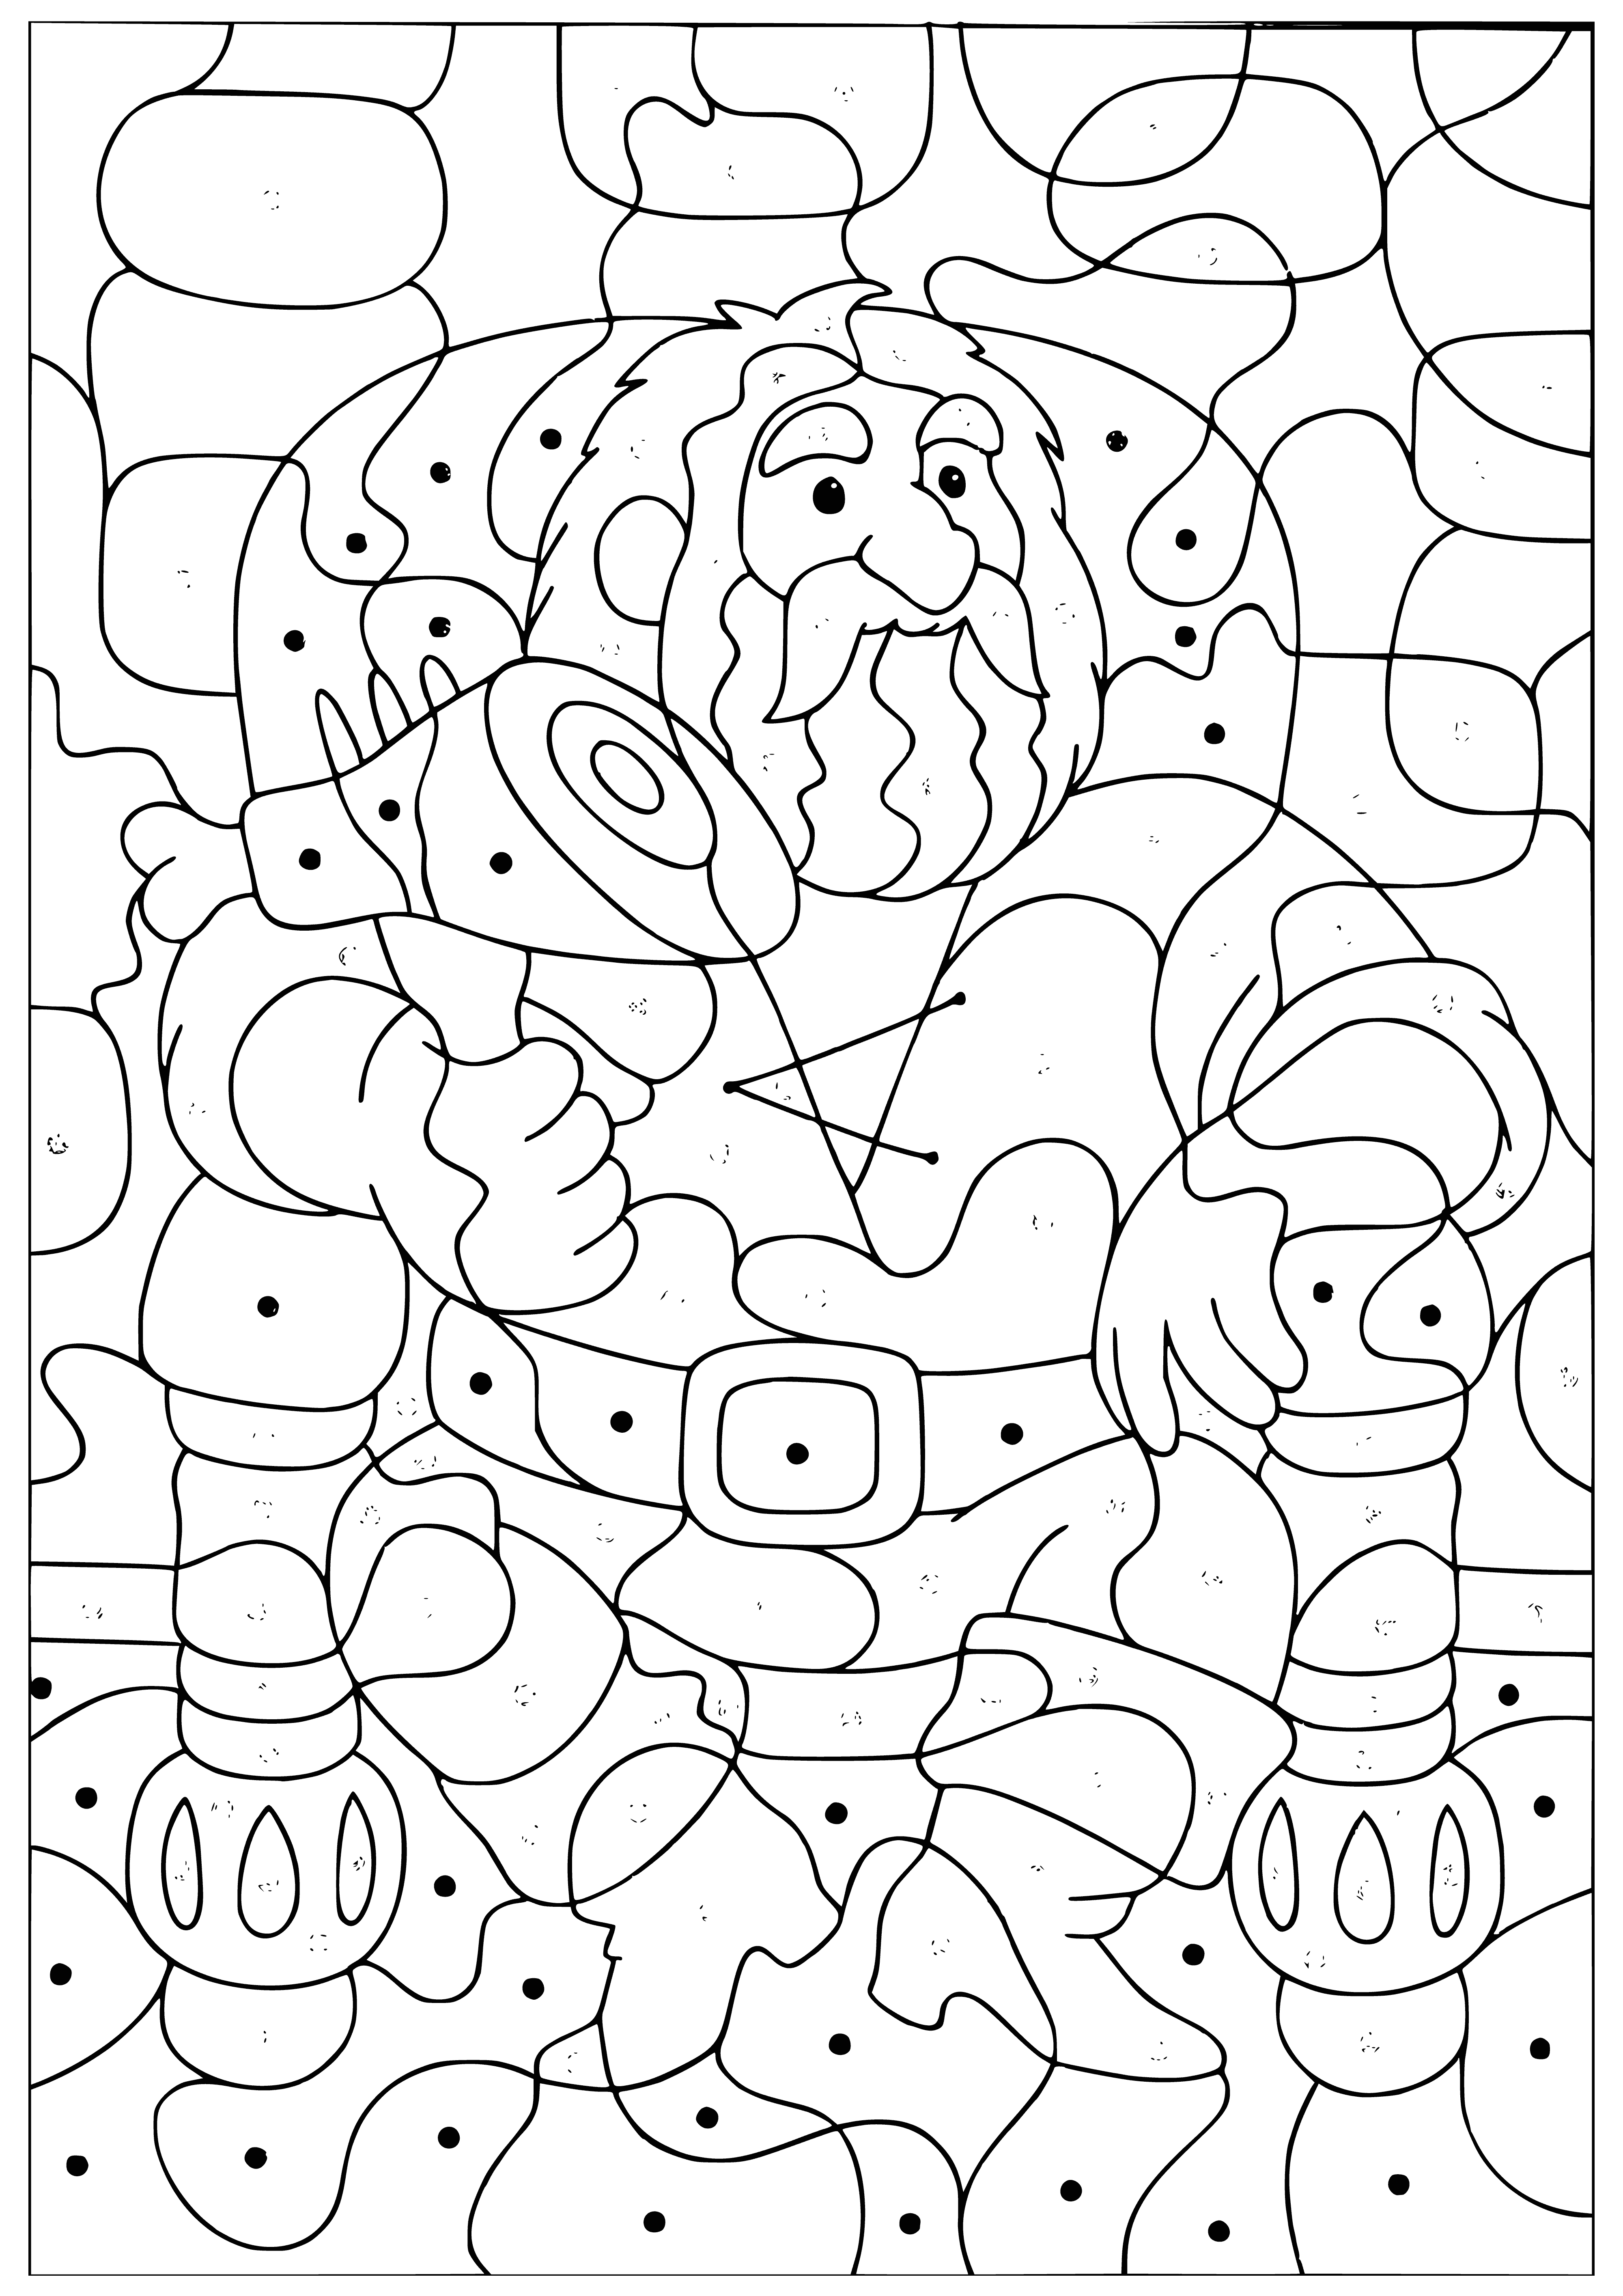 coloring page: Villager in center of page, hut on left, fire/pot on right with human skull on stick.